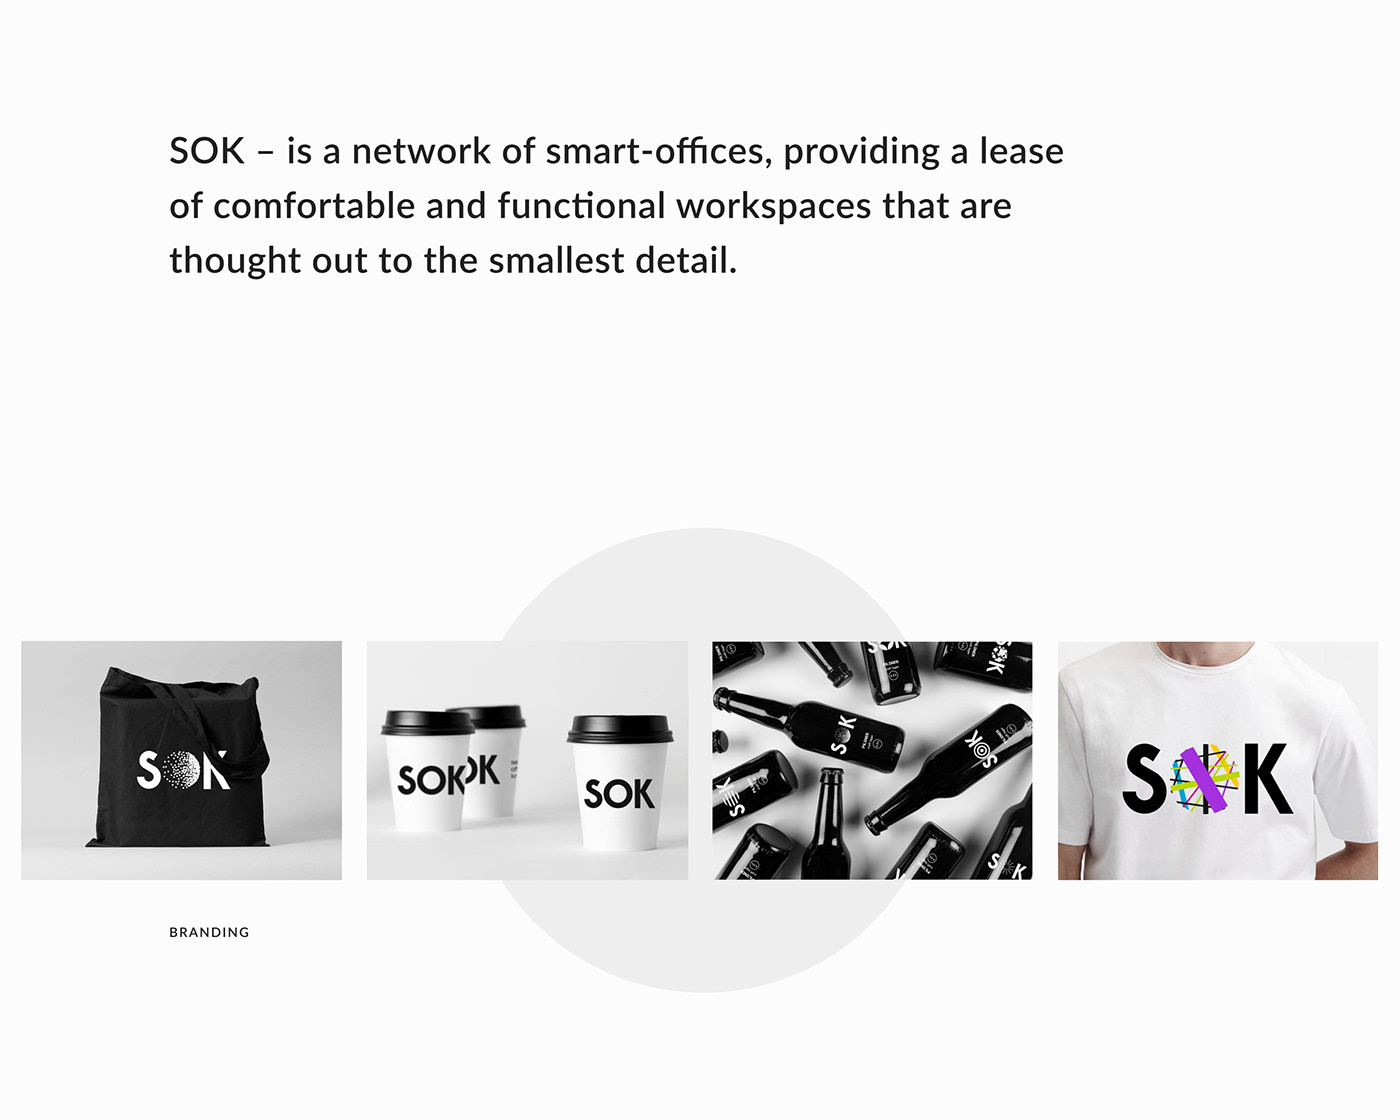 Sok Web Office business coworking educational design service knowledge